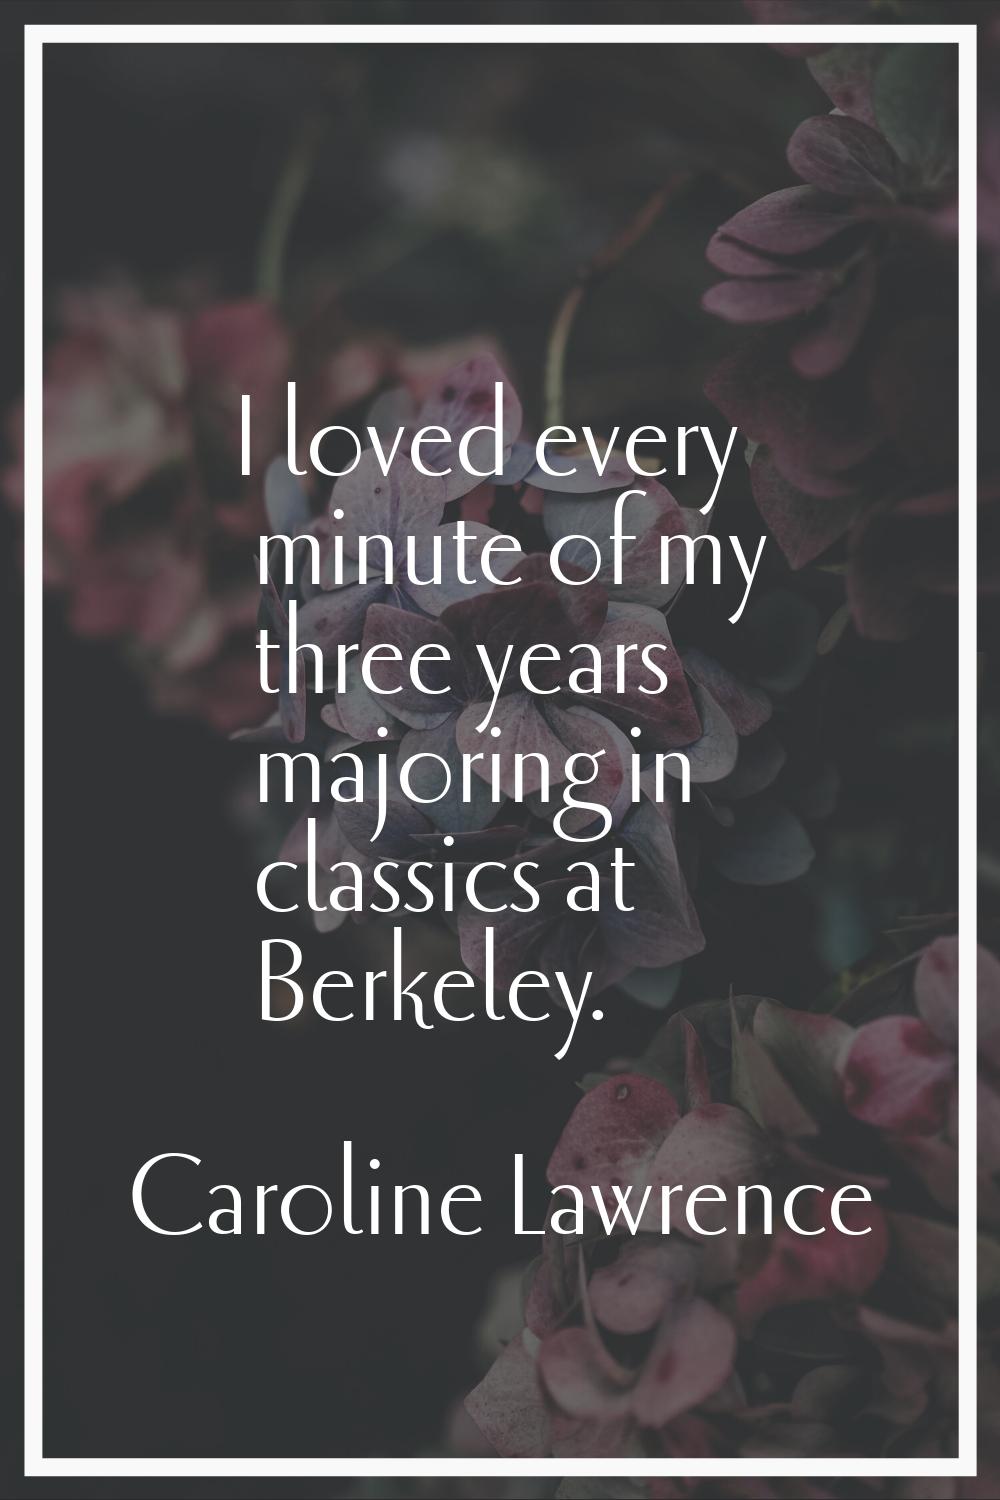 I loved every minute of my three years majoring in classics at Berkeley.